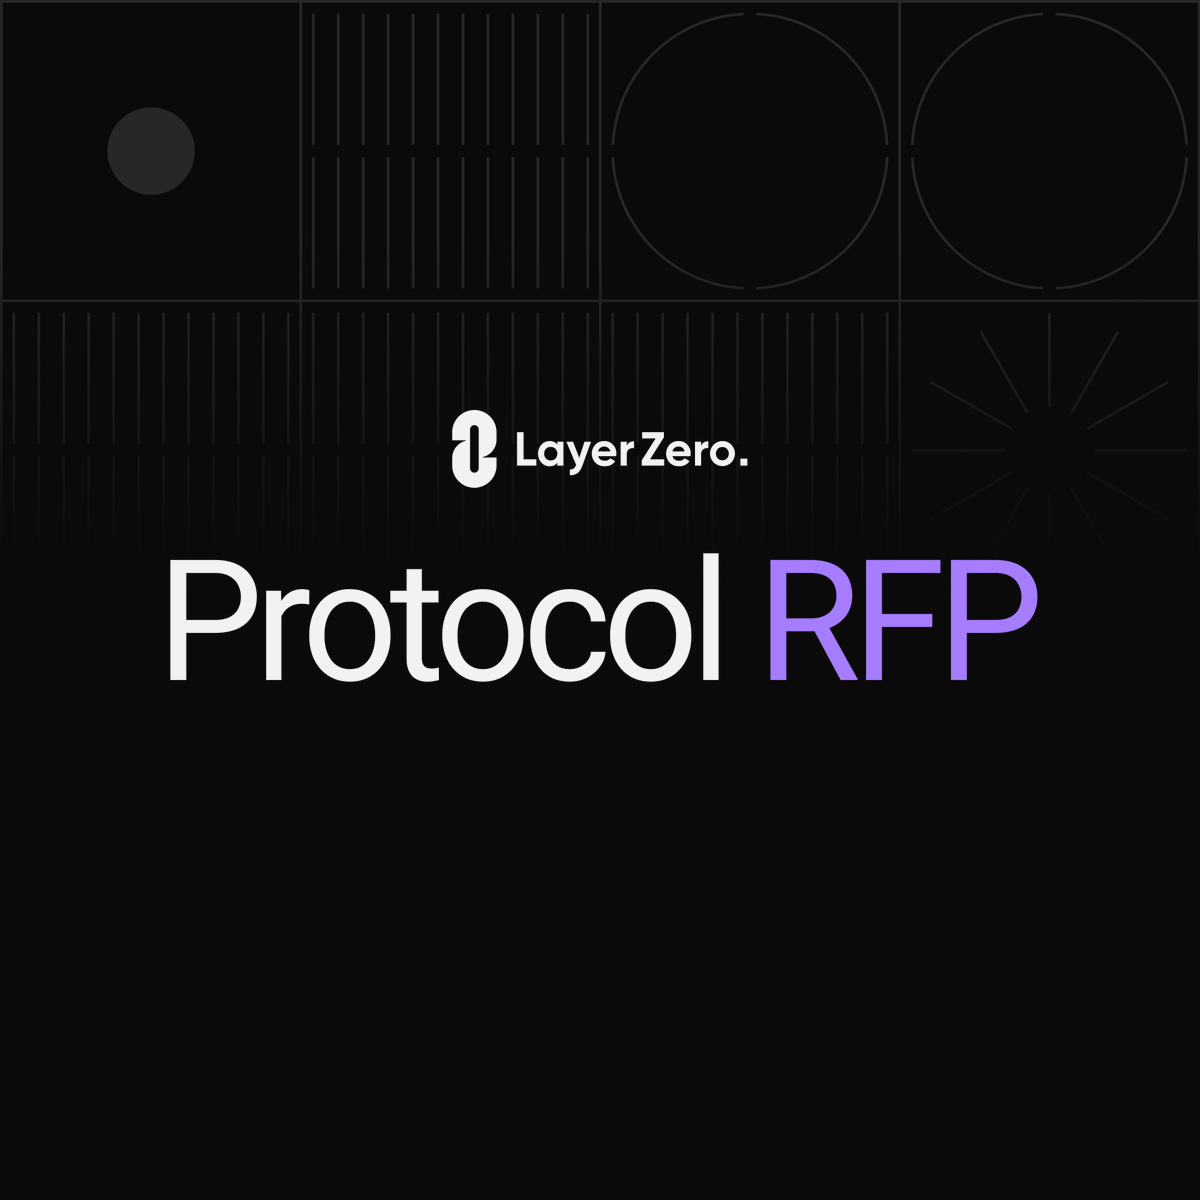 Today, LayerZero introduces the Protocol RFP, marking the first step toward finalizing the TGE allocation.

Developers are the lifeblood of LayerZero – this RFP allows each project to establish its own allocation criteria relative to its overall token allocation.

Additionally,…